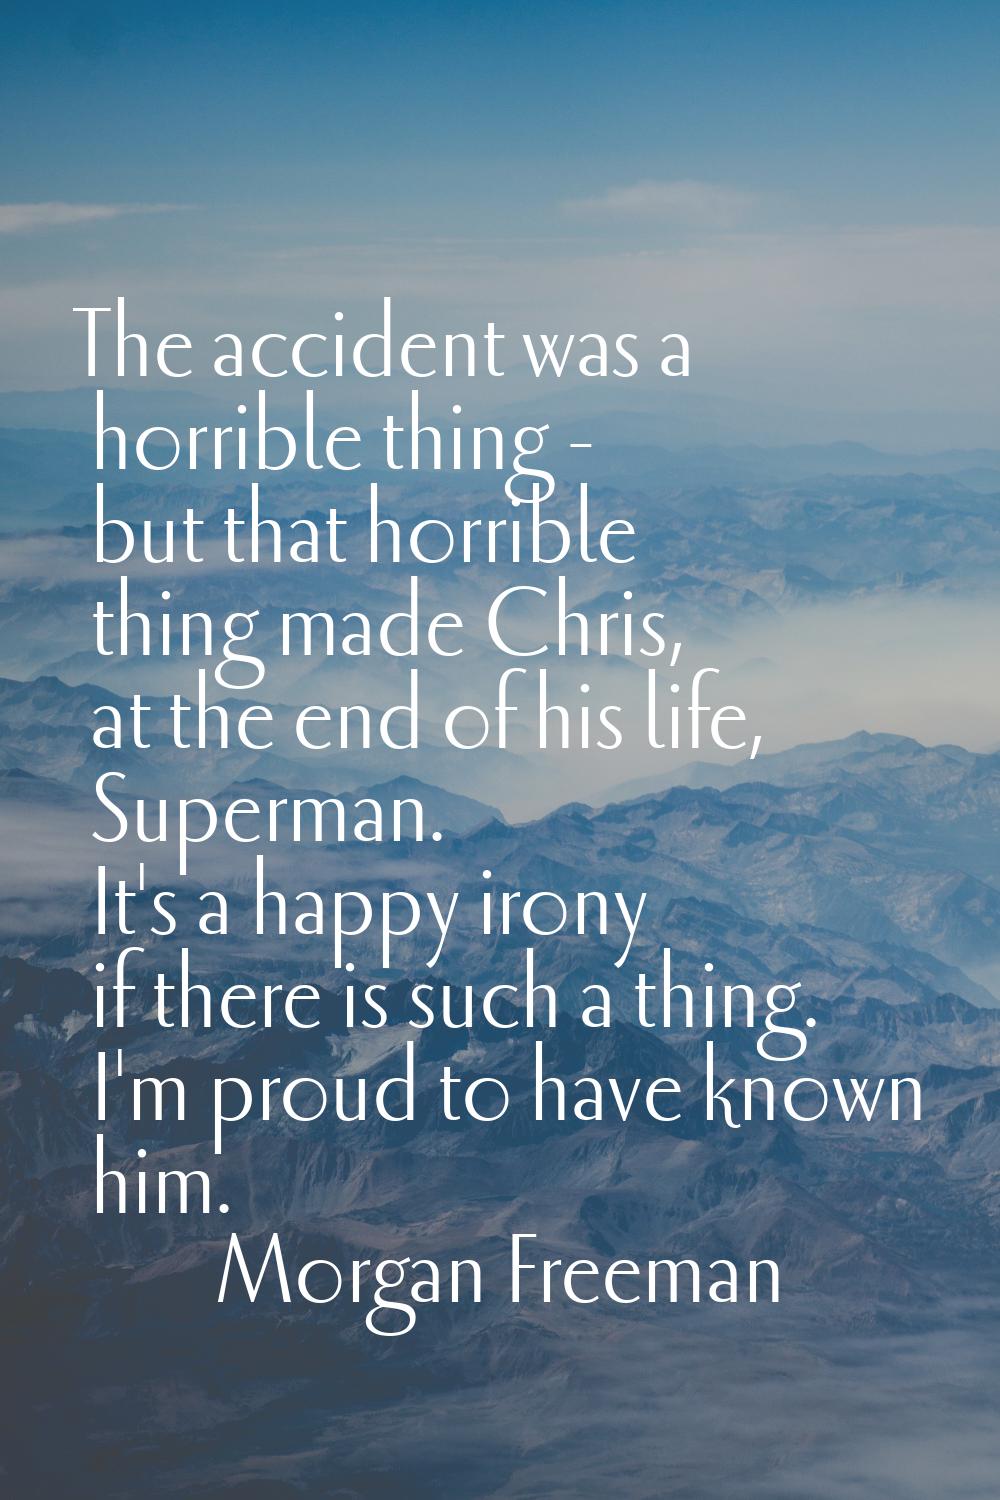 The accident was a horrible thing - but that horrible thing made Chris, at the end of his life, Sup